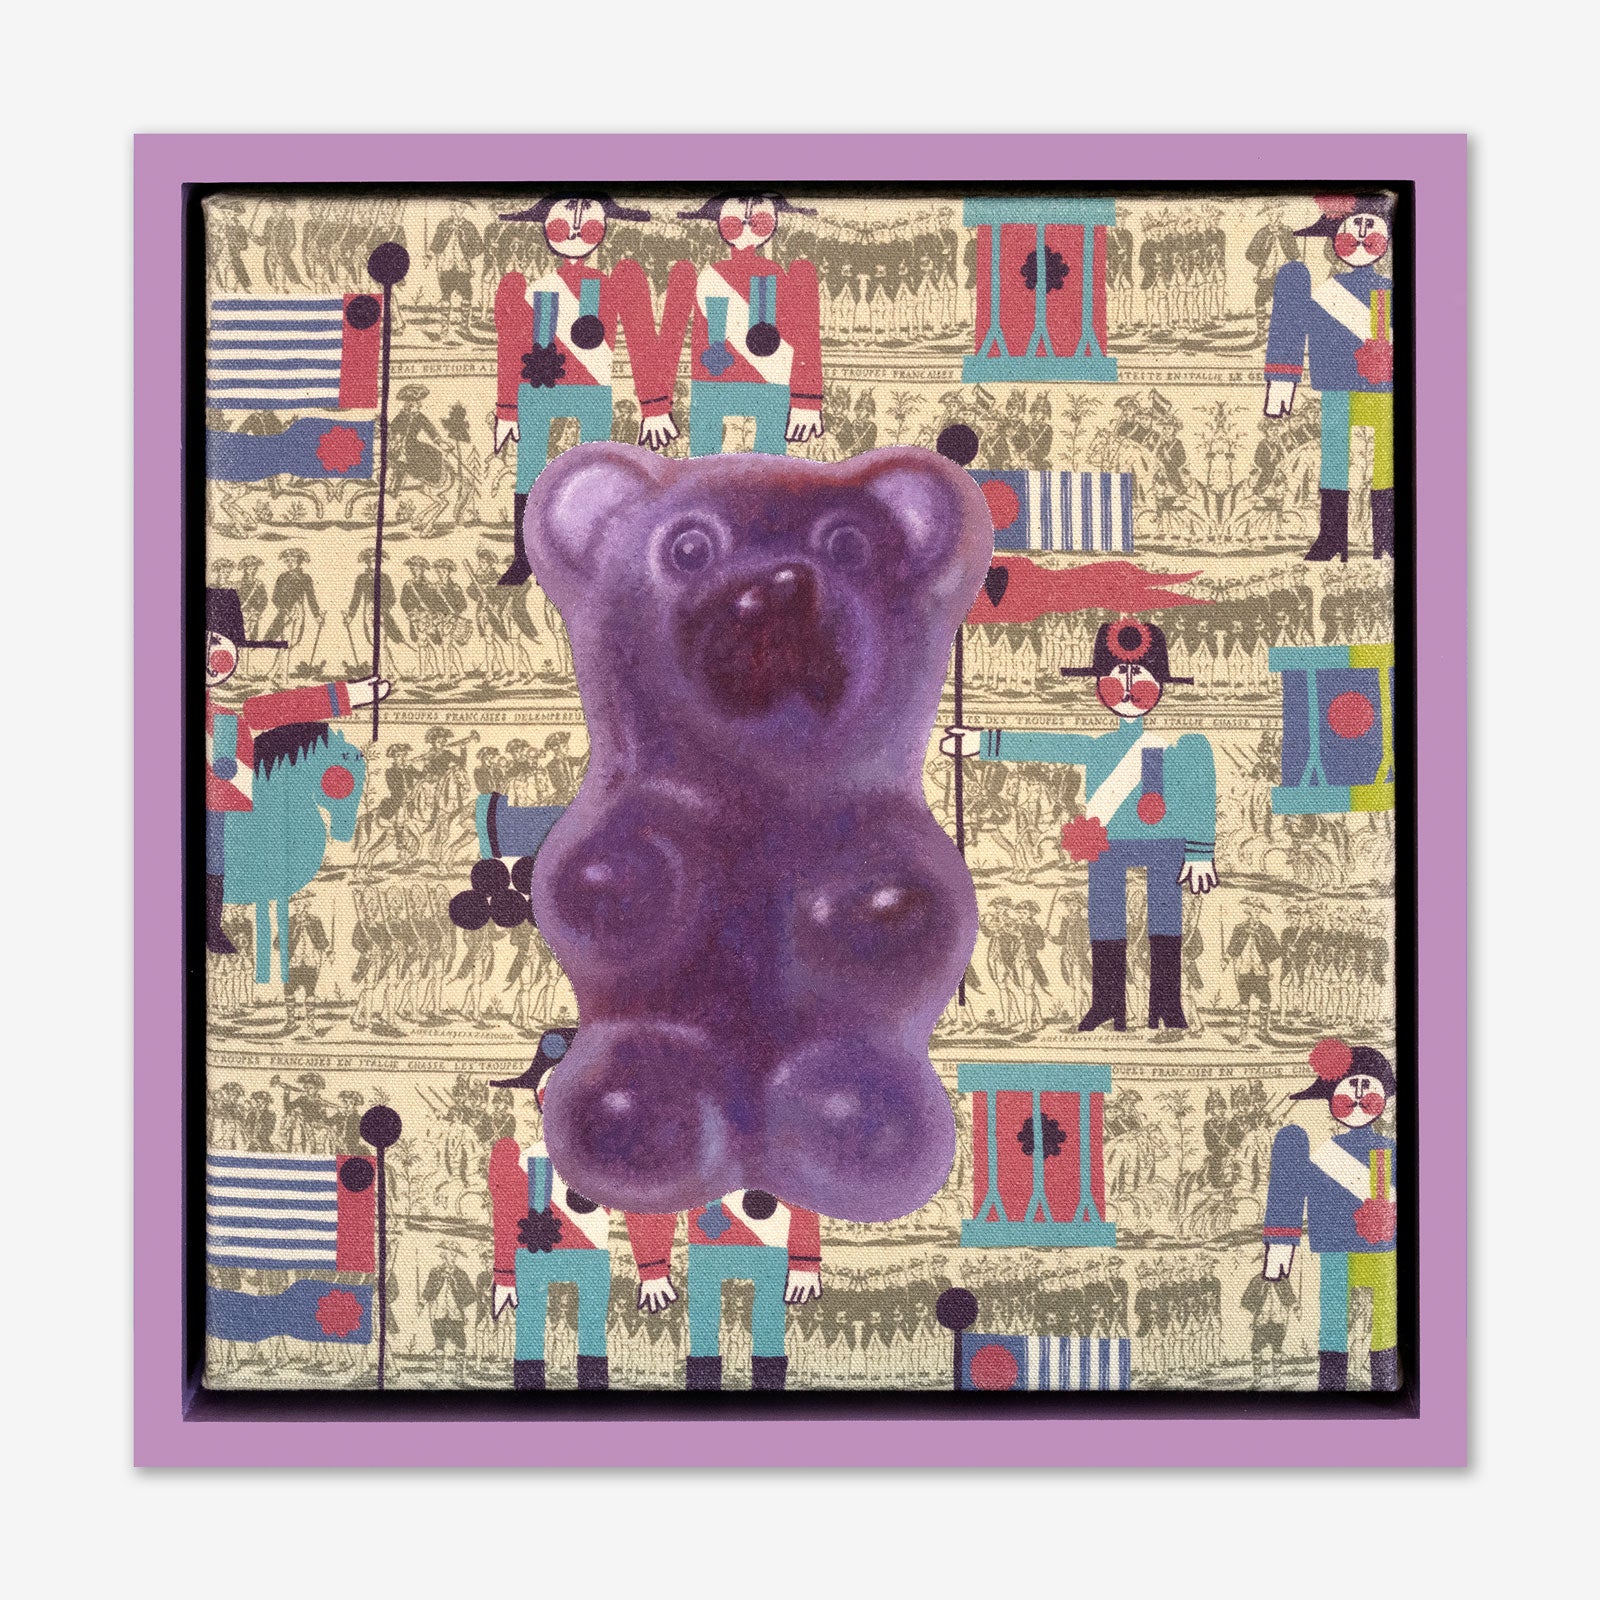 Artsuite - Jack Early Gummy Bear - Purple - Original Painting - 13 x 13 inches. Early's lexicon is drawn from wondrous childhood memories, where ordinary things and events can leave long-lasting impressions and he composes experiences to communicate sweet remembrances of simpler times.